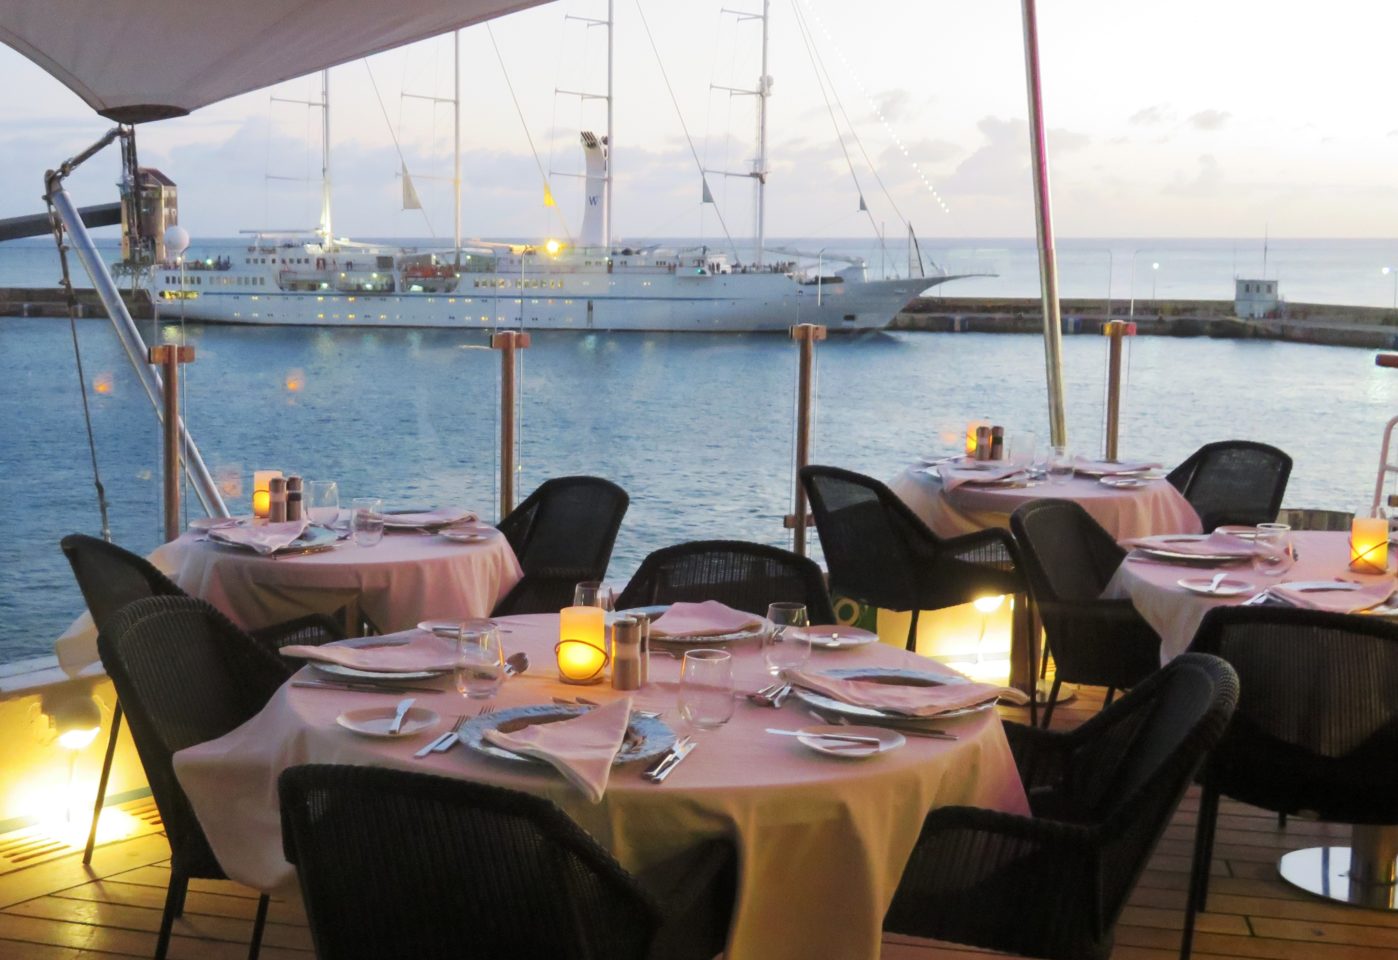 Windstar Cruises Star Legend ~ our table with its glorious views and sea breezes awaits us in paradise 